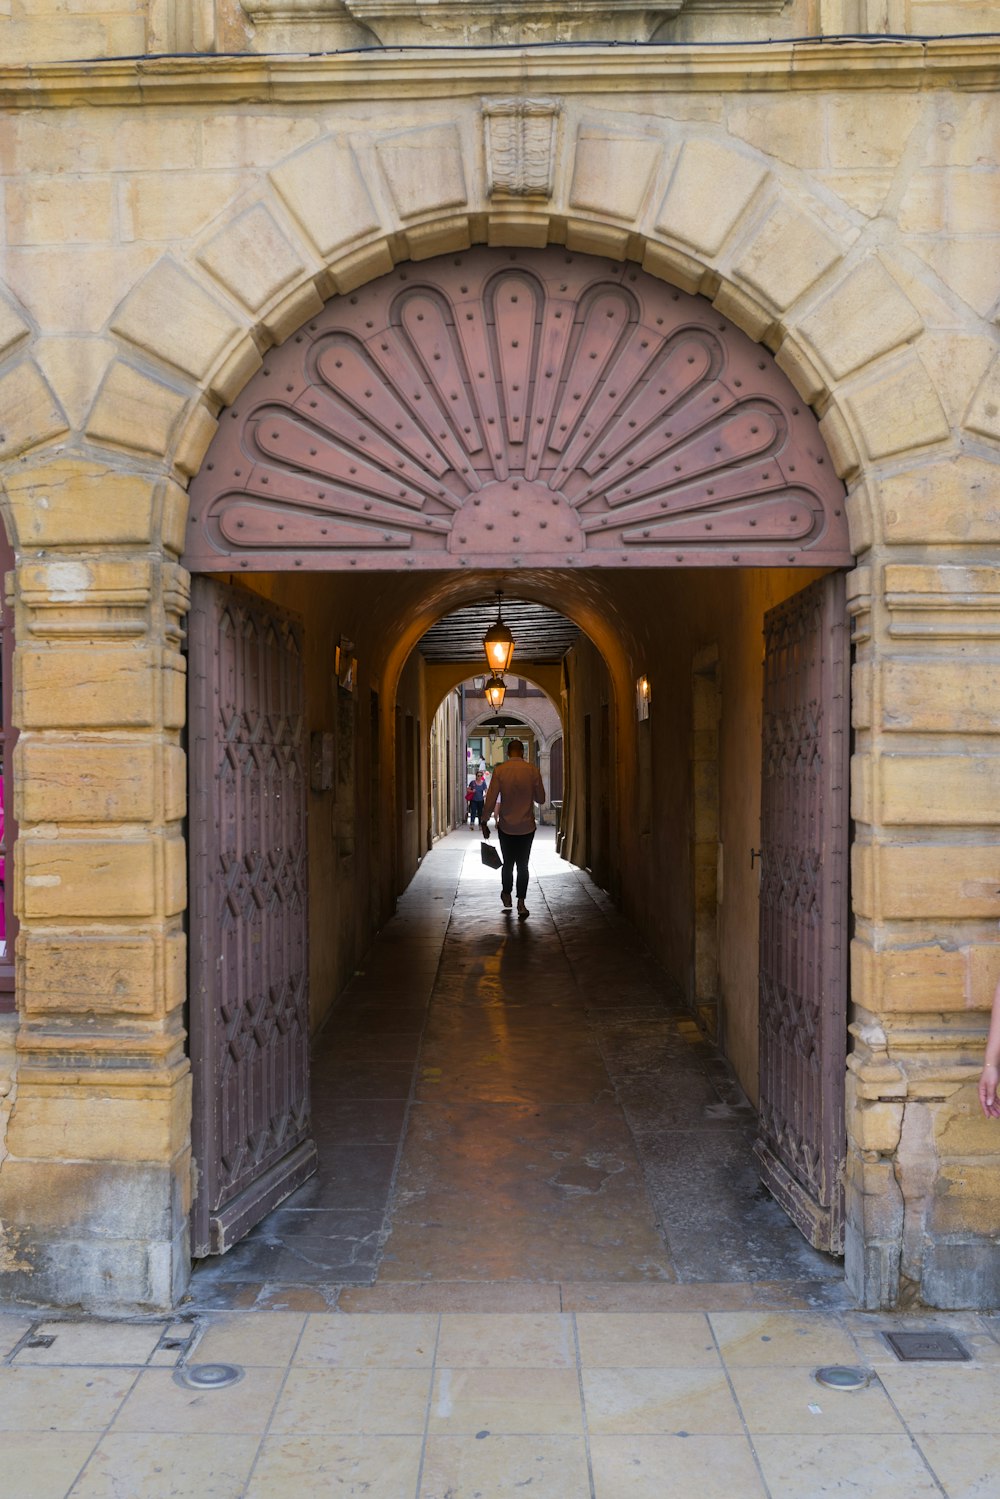 a person walking through an archway